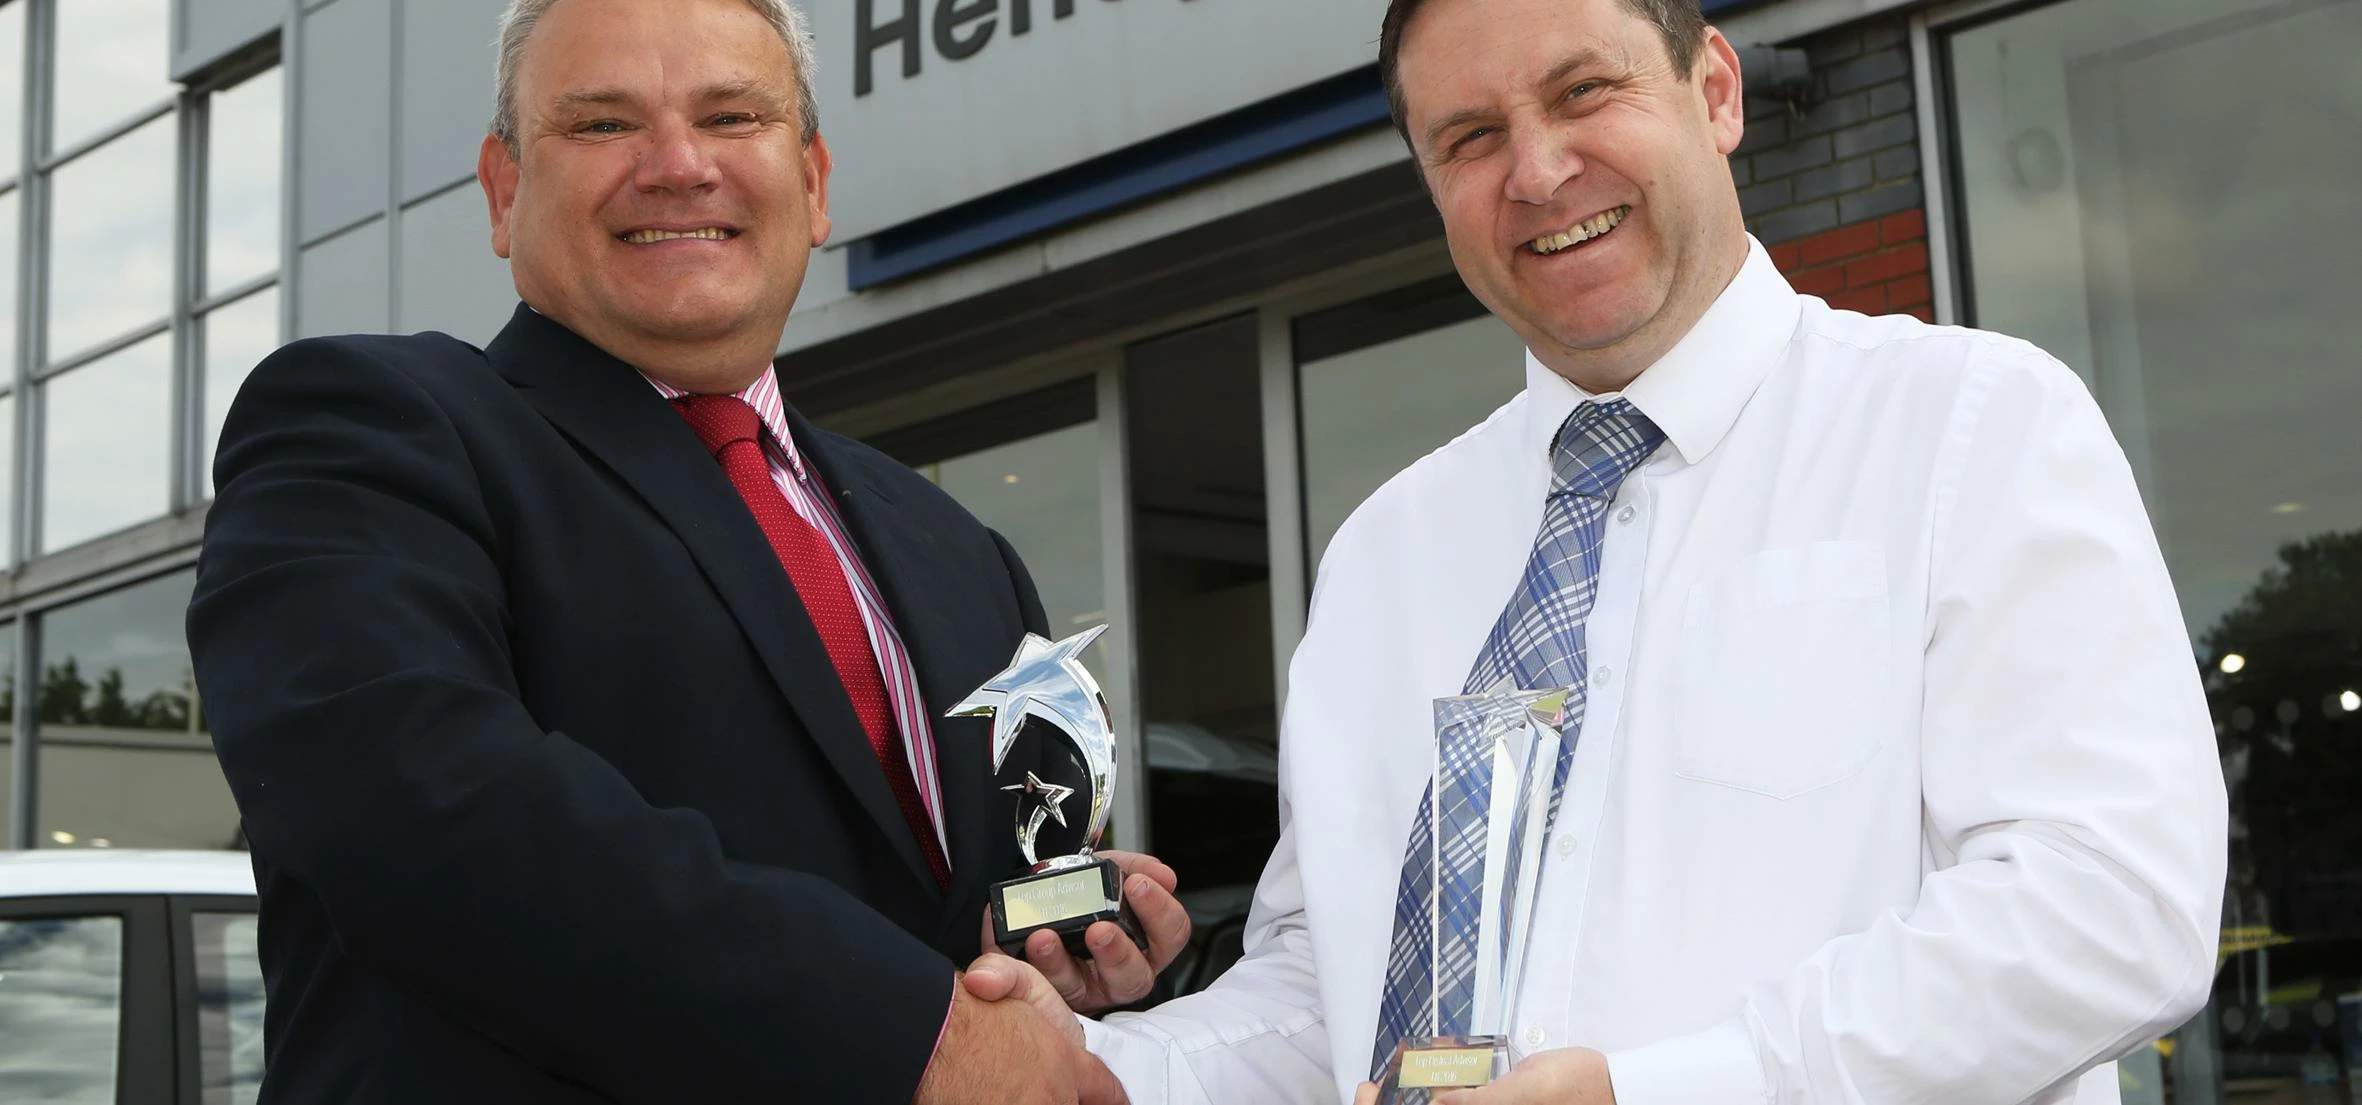 Ford district manager Andy Lee presents Stuart Layton with his awards